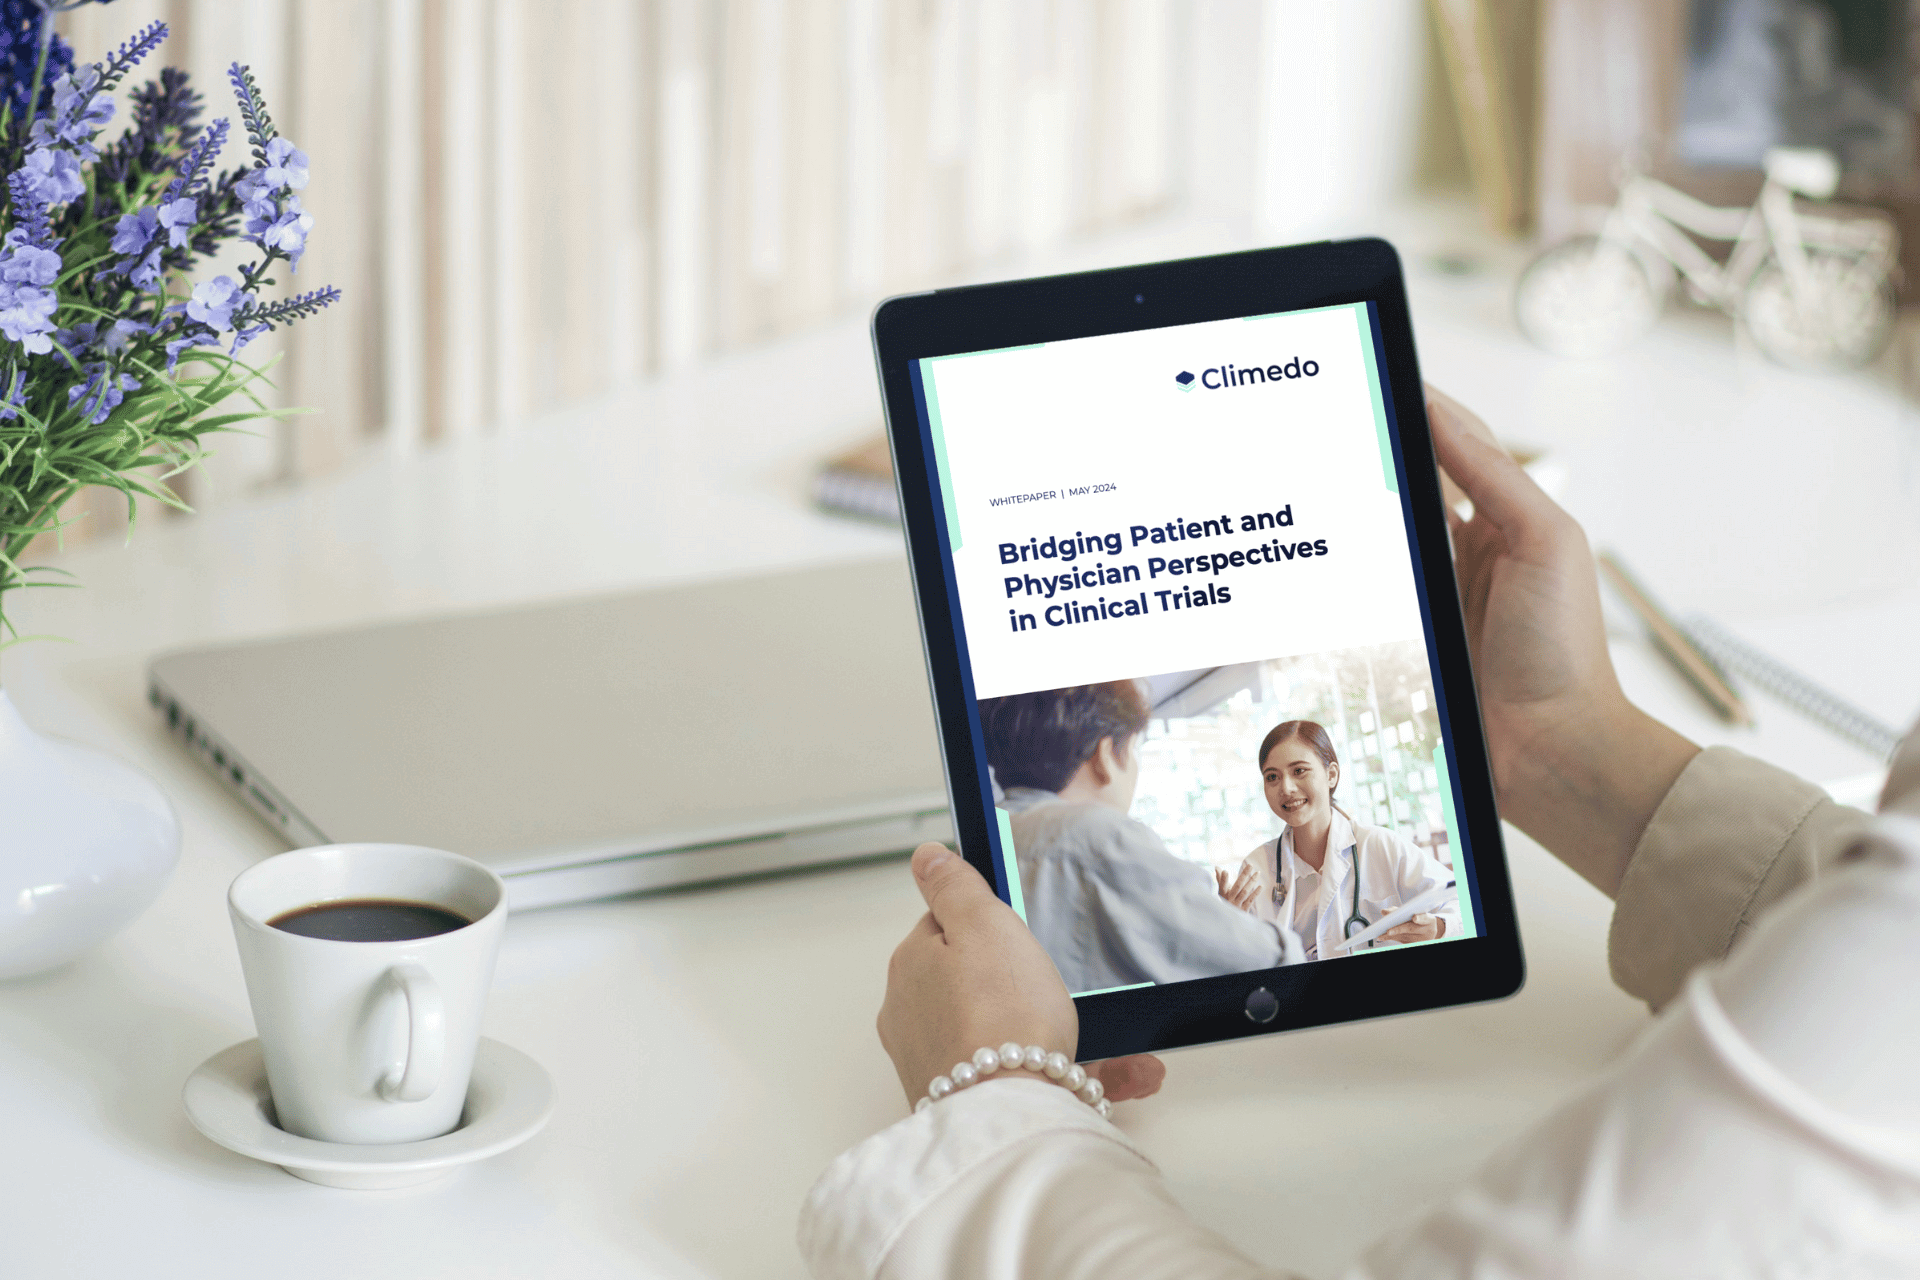 Neues Whitepaper: Bridging Patient and Physician Perspectives in Clinical Trials